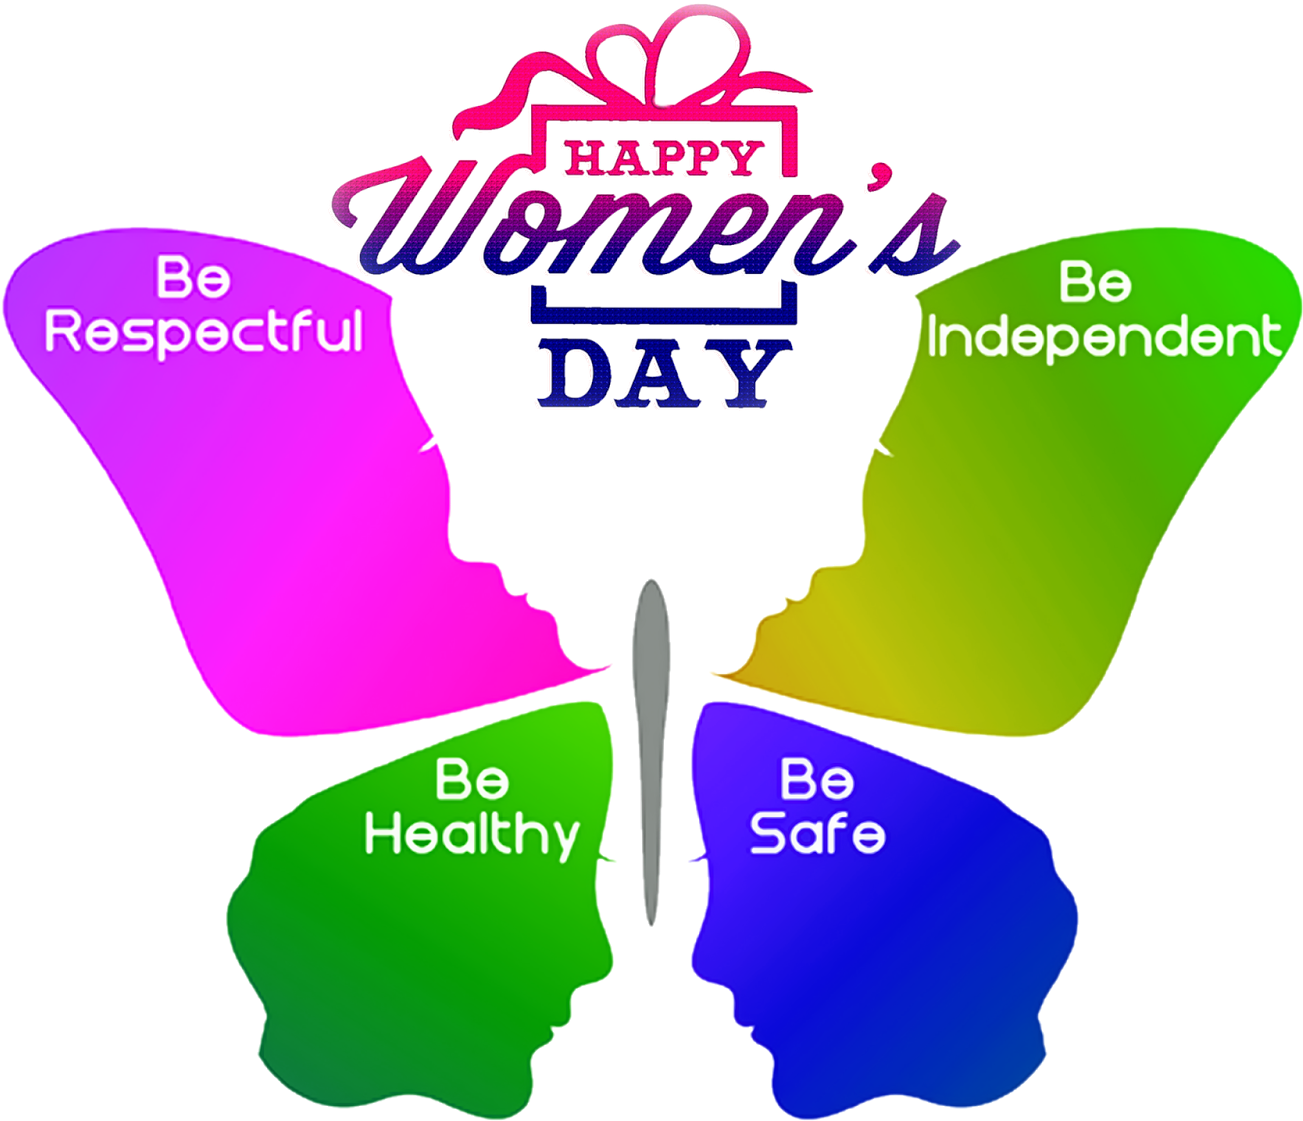 Happy International Womens Day Wallpapers Wallpaper Cave 0847